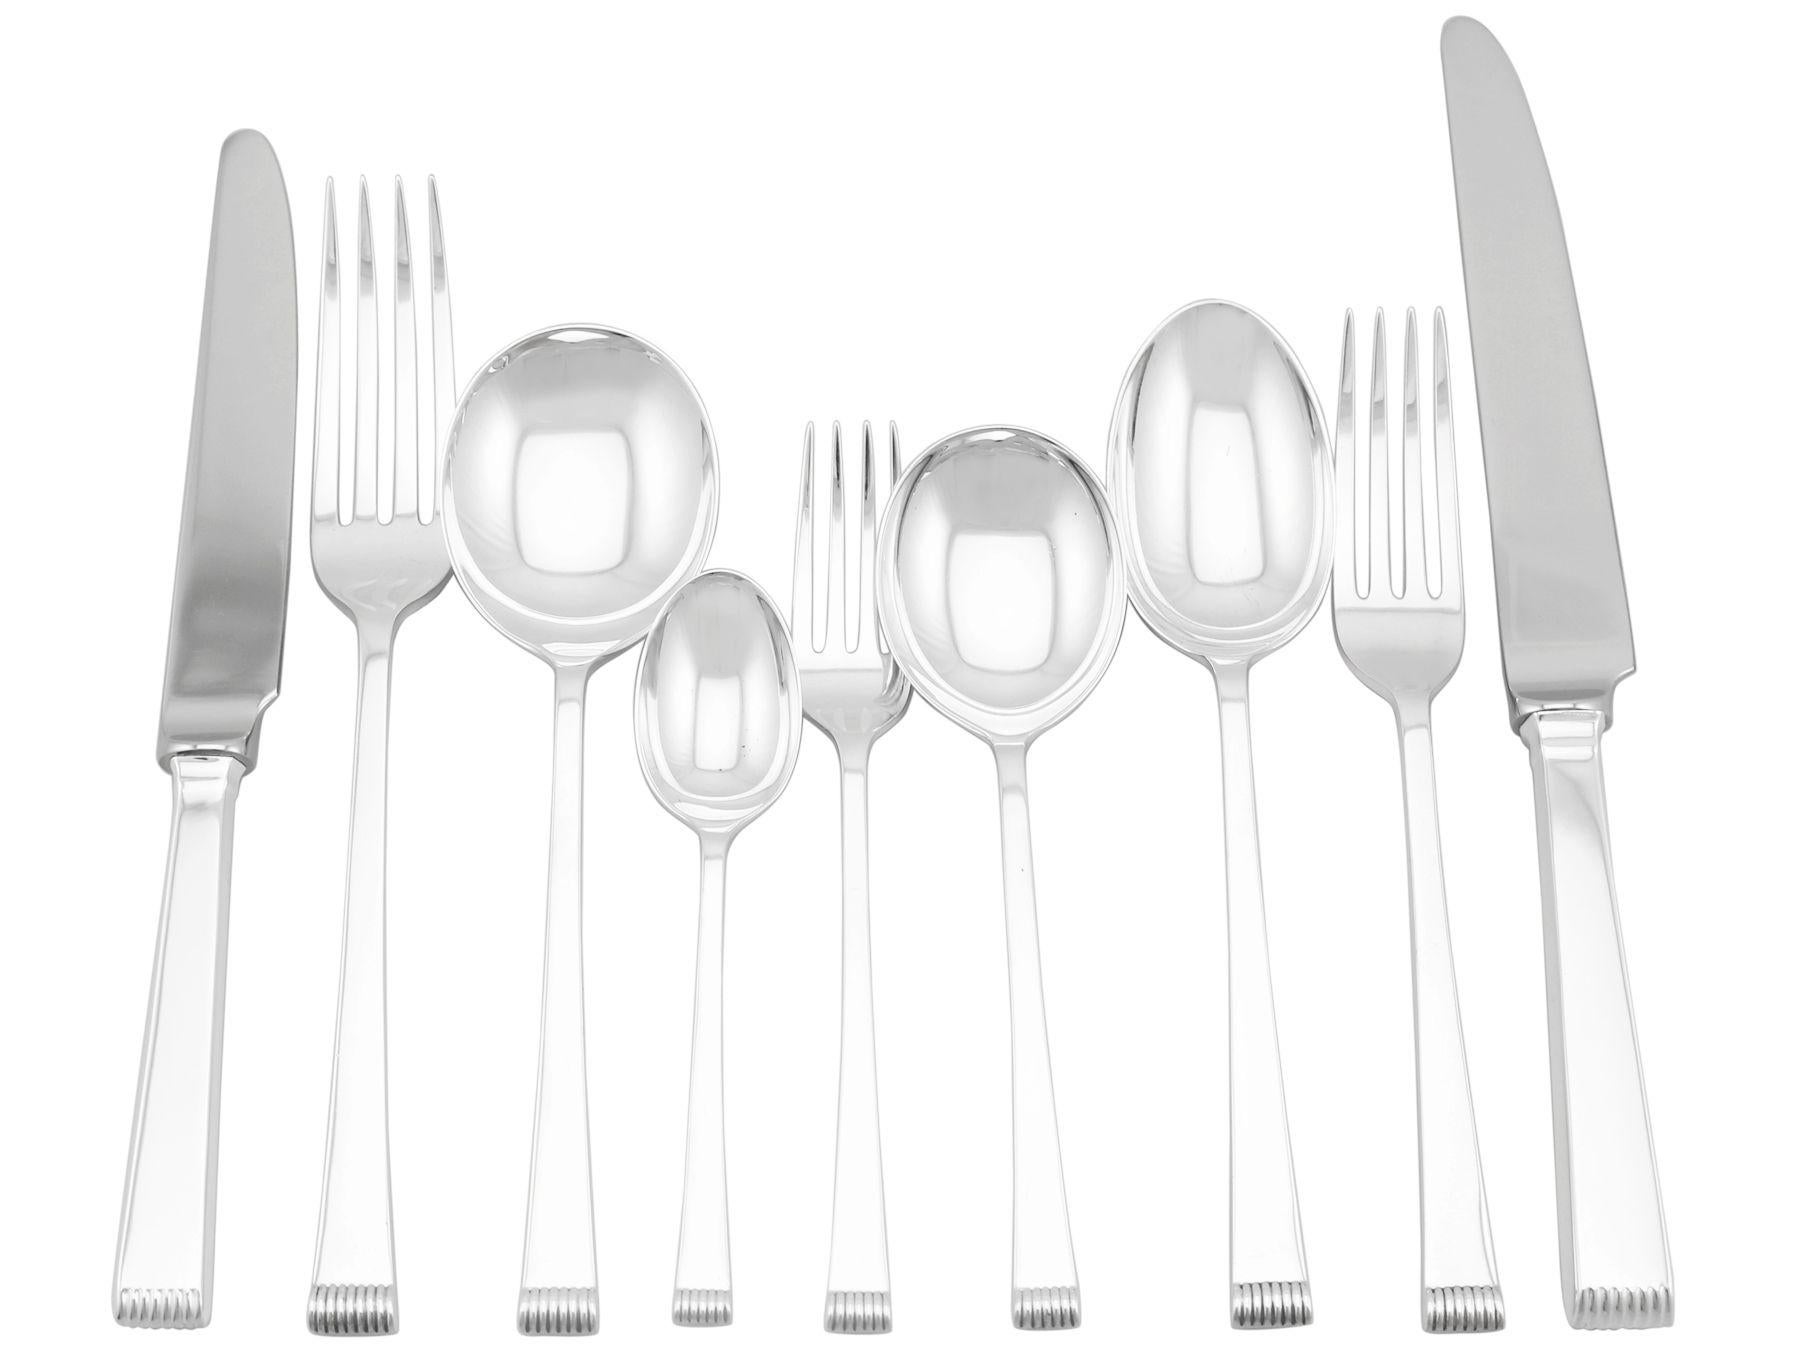 An exceptional, fine and impressive vintage Elizabeth II English sterling silver flatware service for eight persons; an addition to our canteen of cutlery collection.

The pieces of this exceptional vintage Elizabeth II straight sterling silver